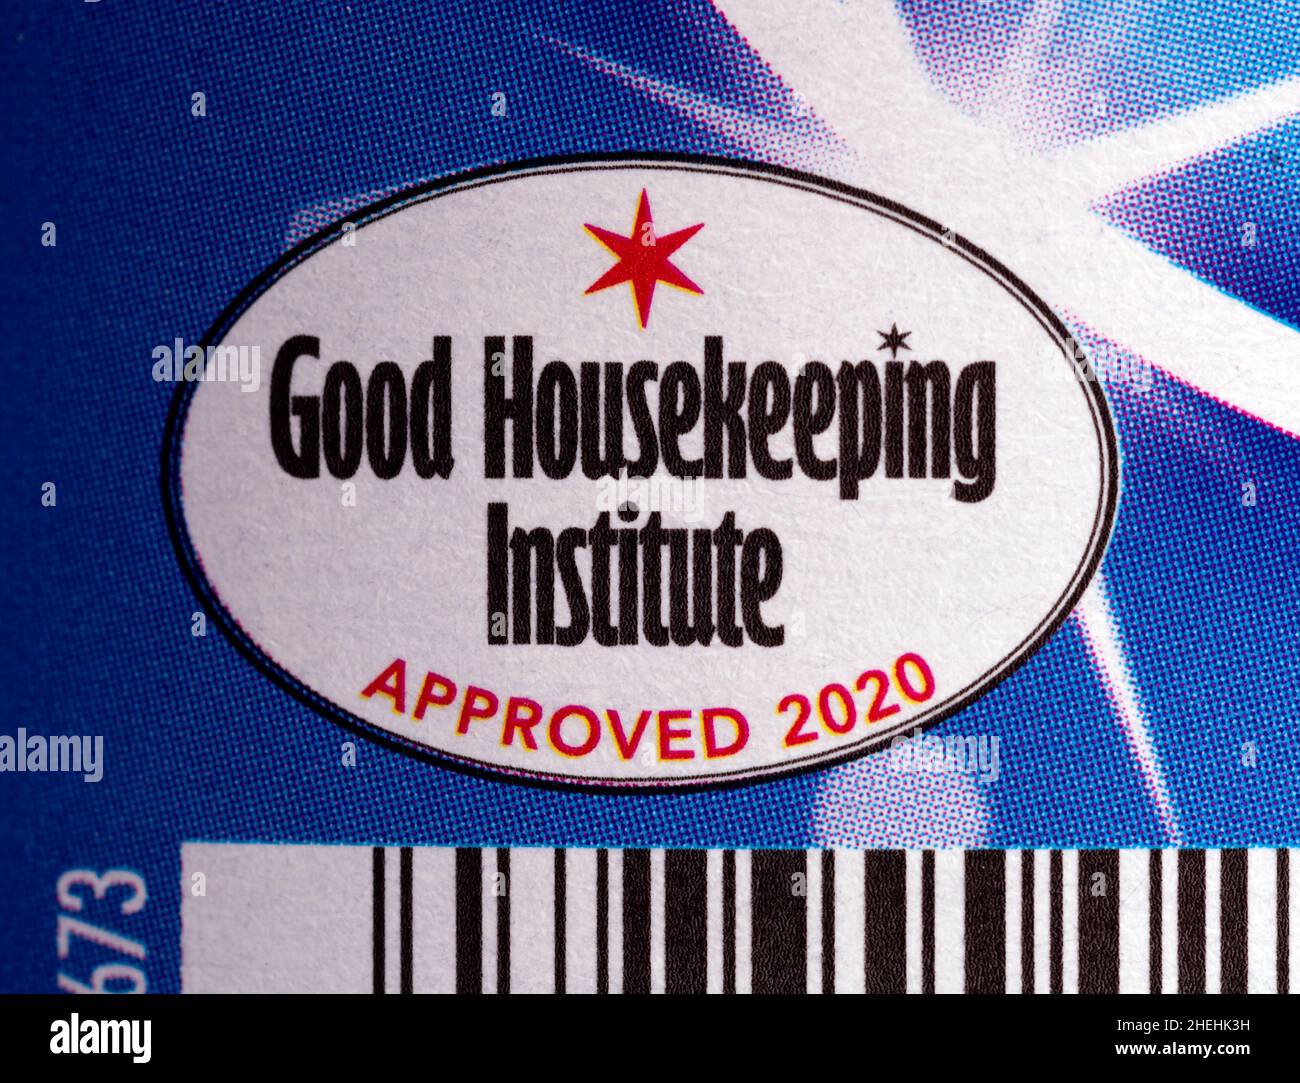 Good Housekeeping Institute approved symbol on a product Stock Photo